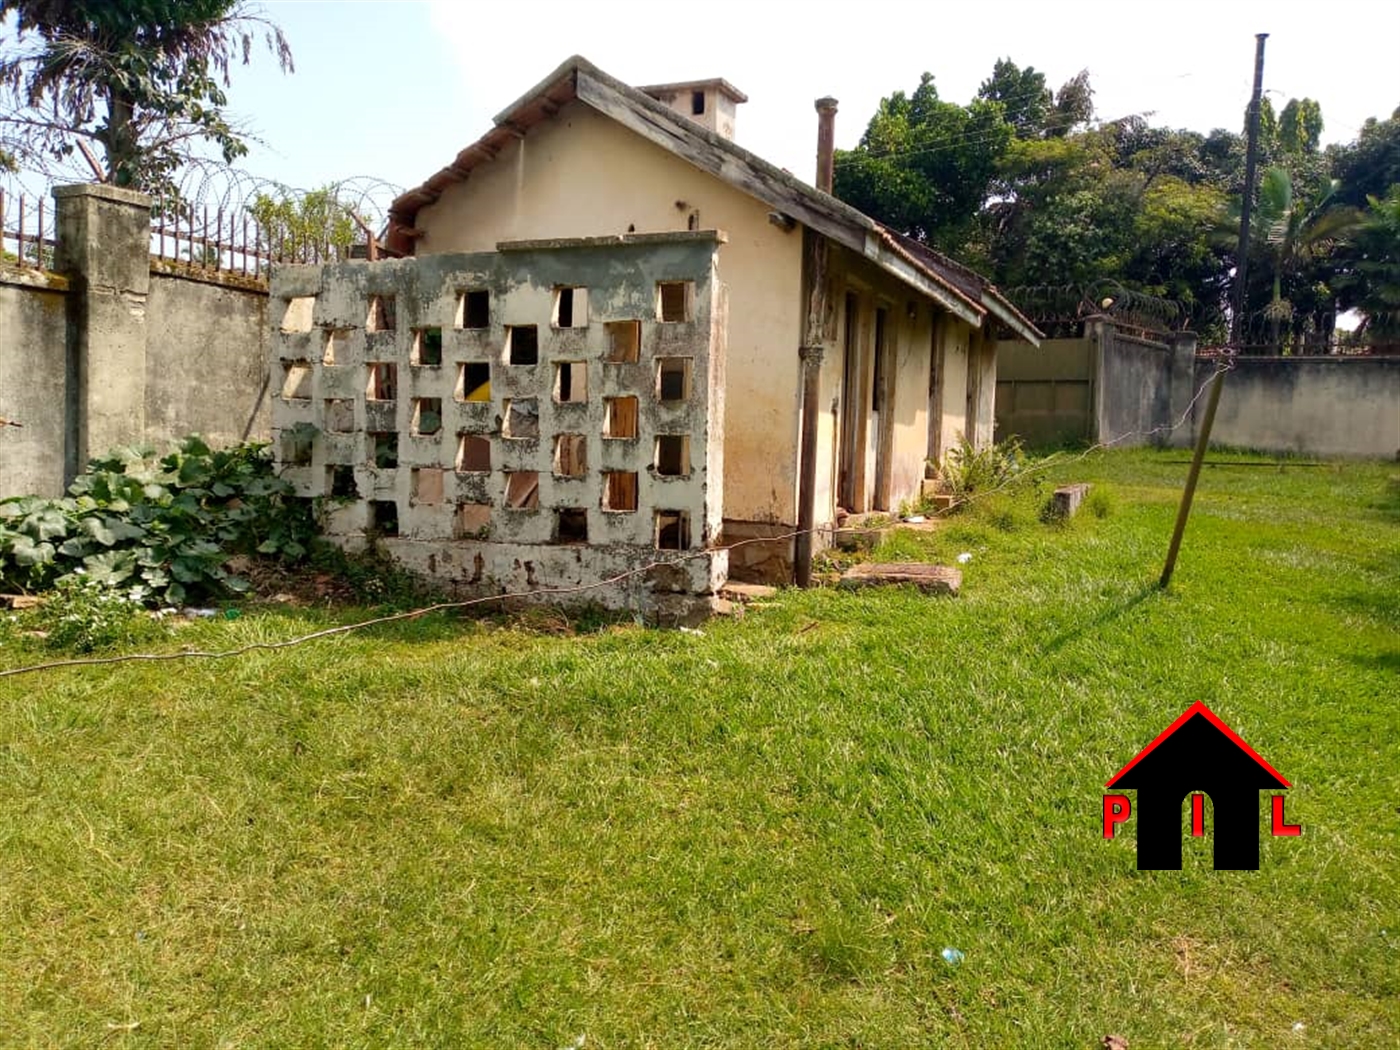 Commercial Land for sale in Bugonga Wakiso